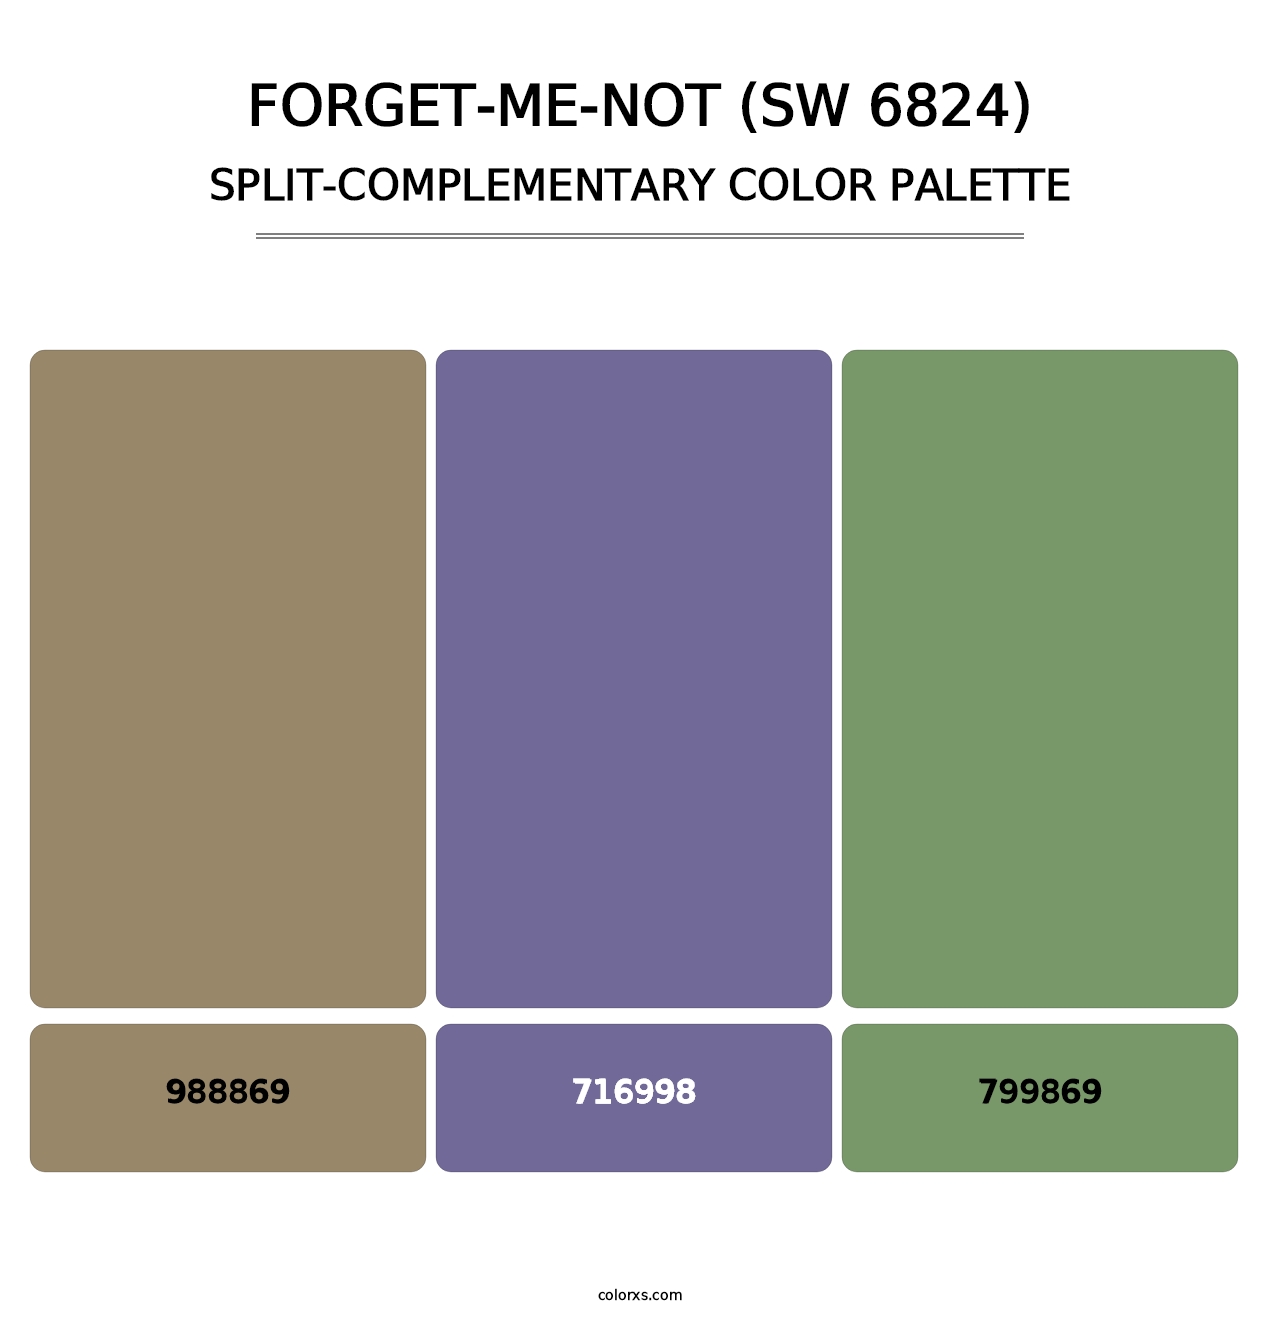 Forget-Me-Not (SW 6824) - Split-Complementary Color Palette